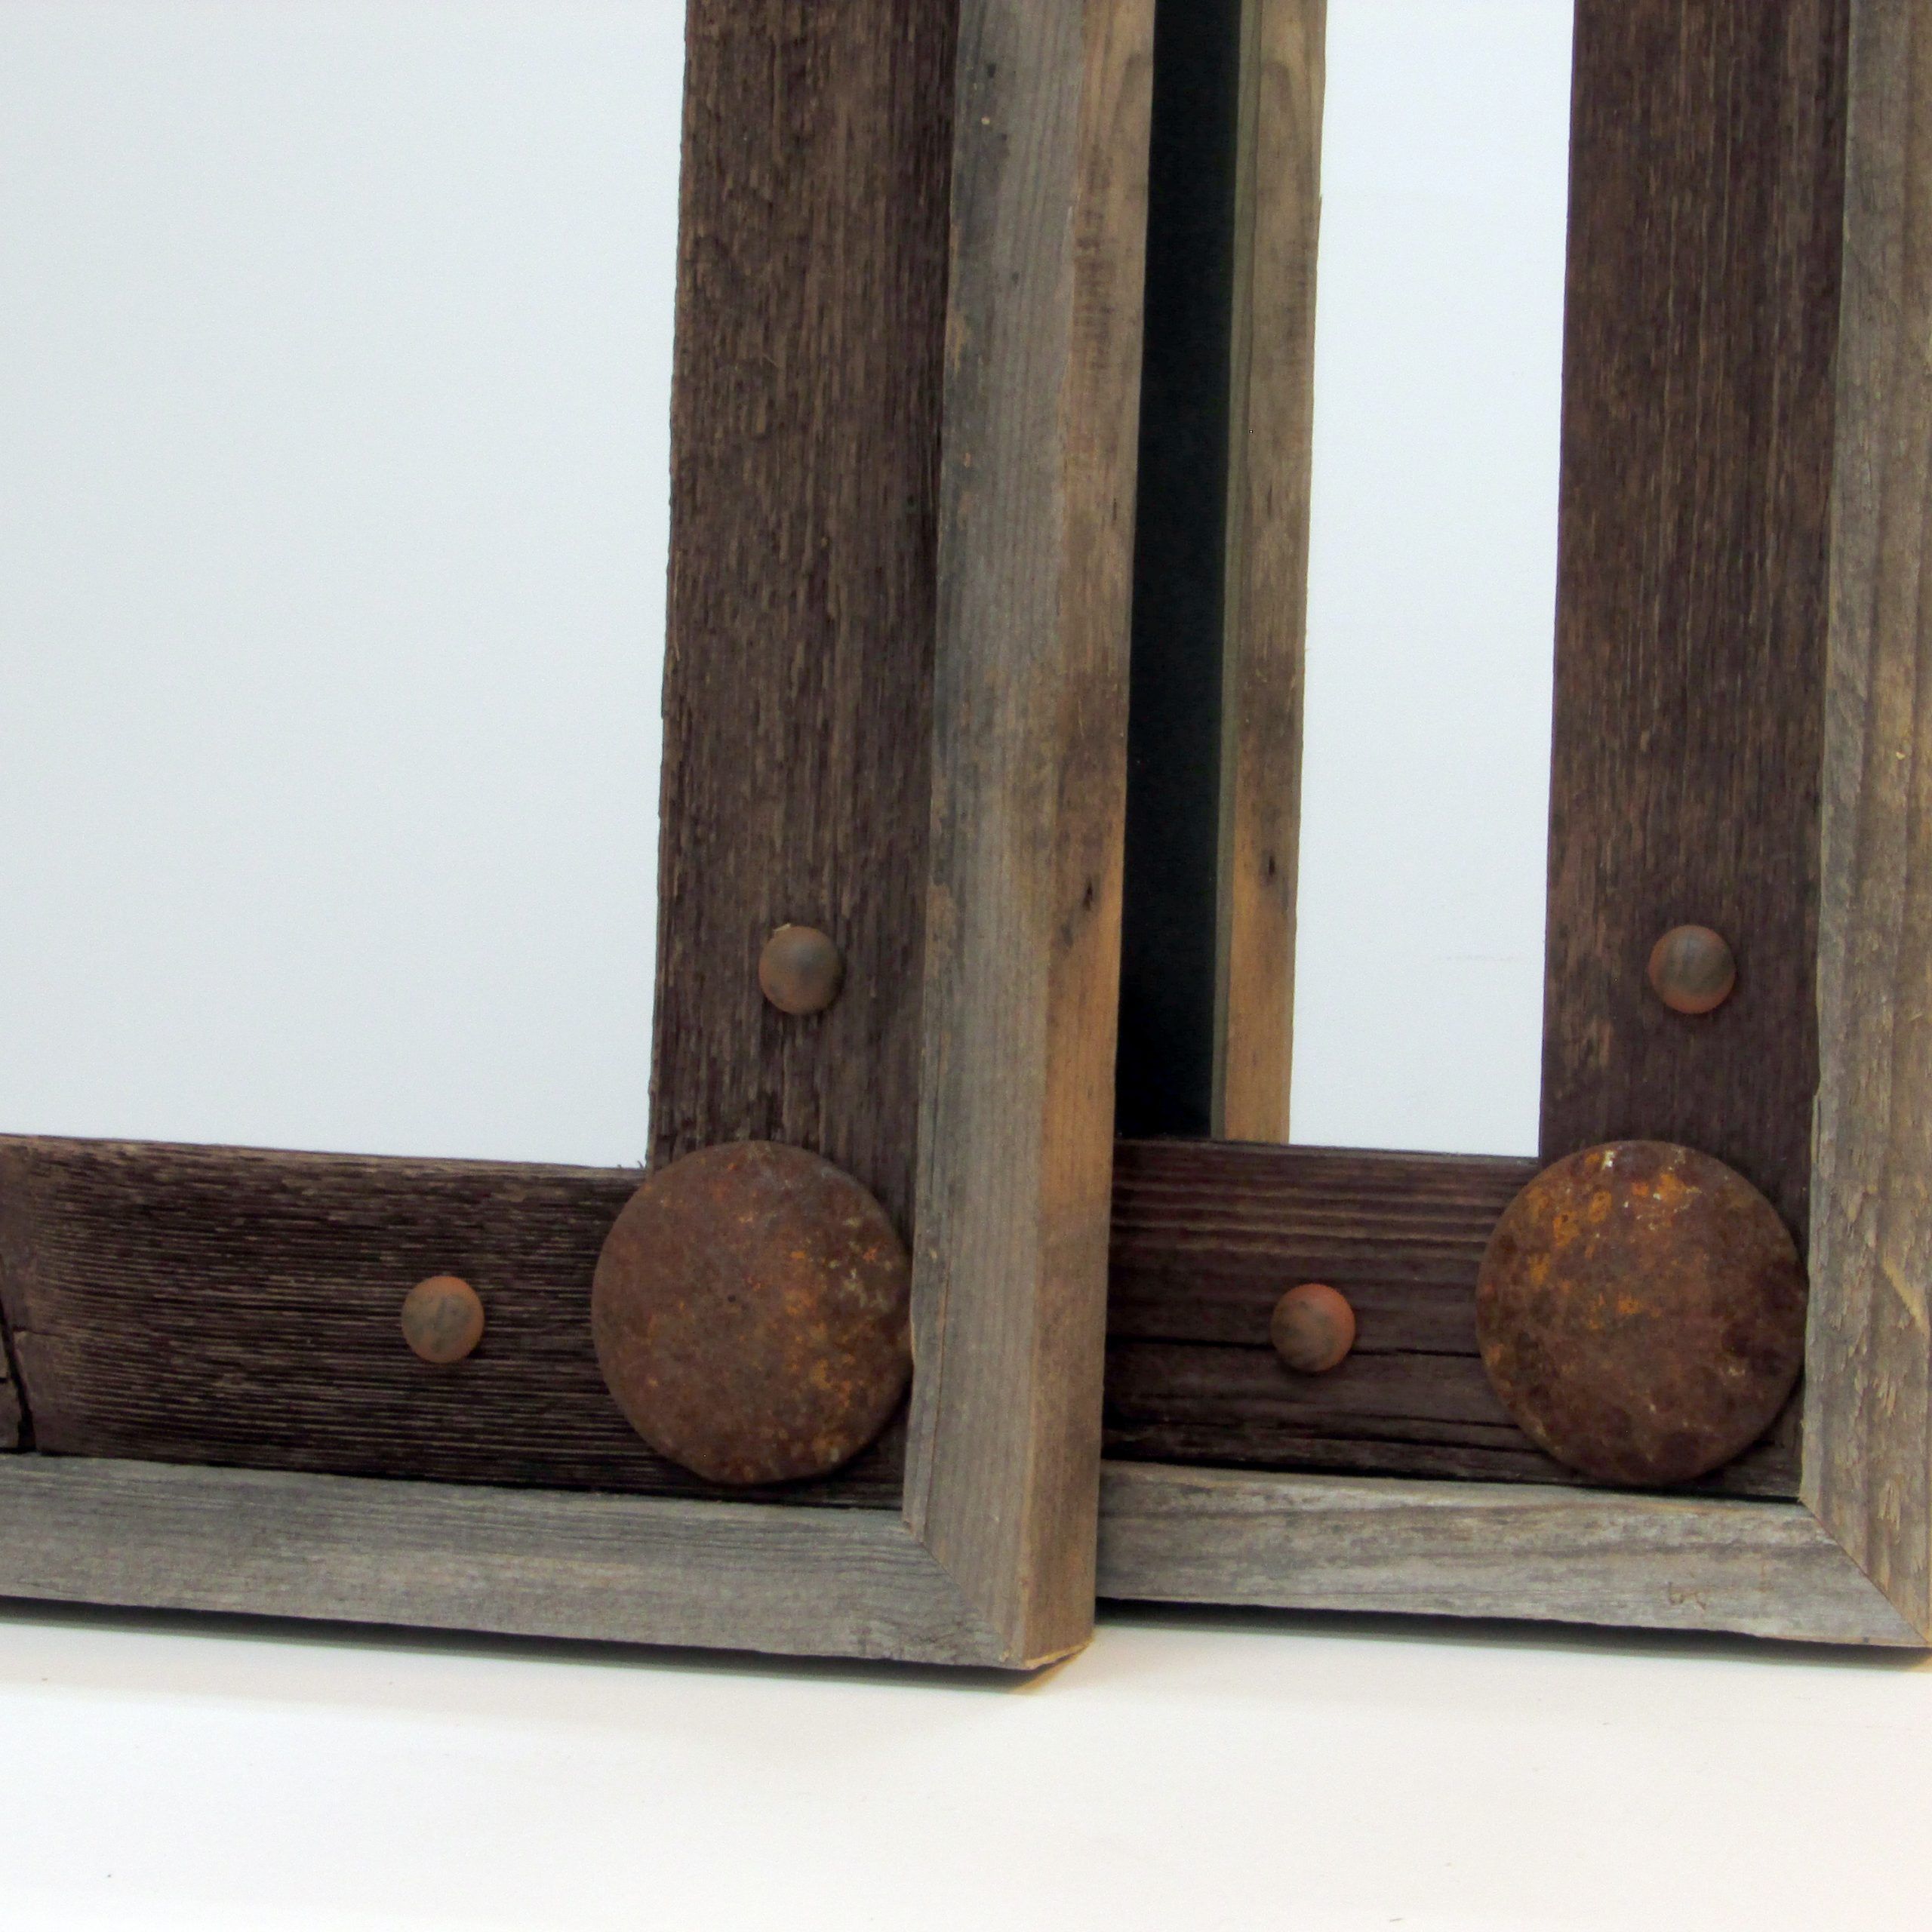 Rustic Reclaimed Wood Mirror Frames Within Rustic Getaway Wood Wall Mirrors (View 15 of 15)